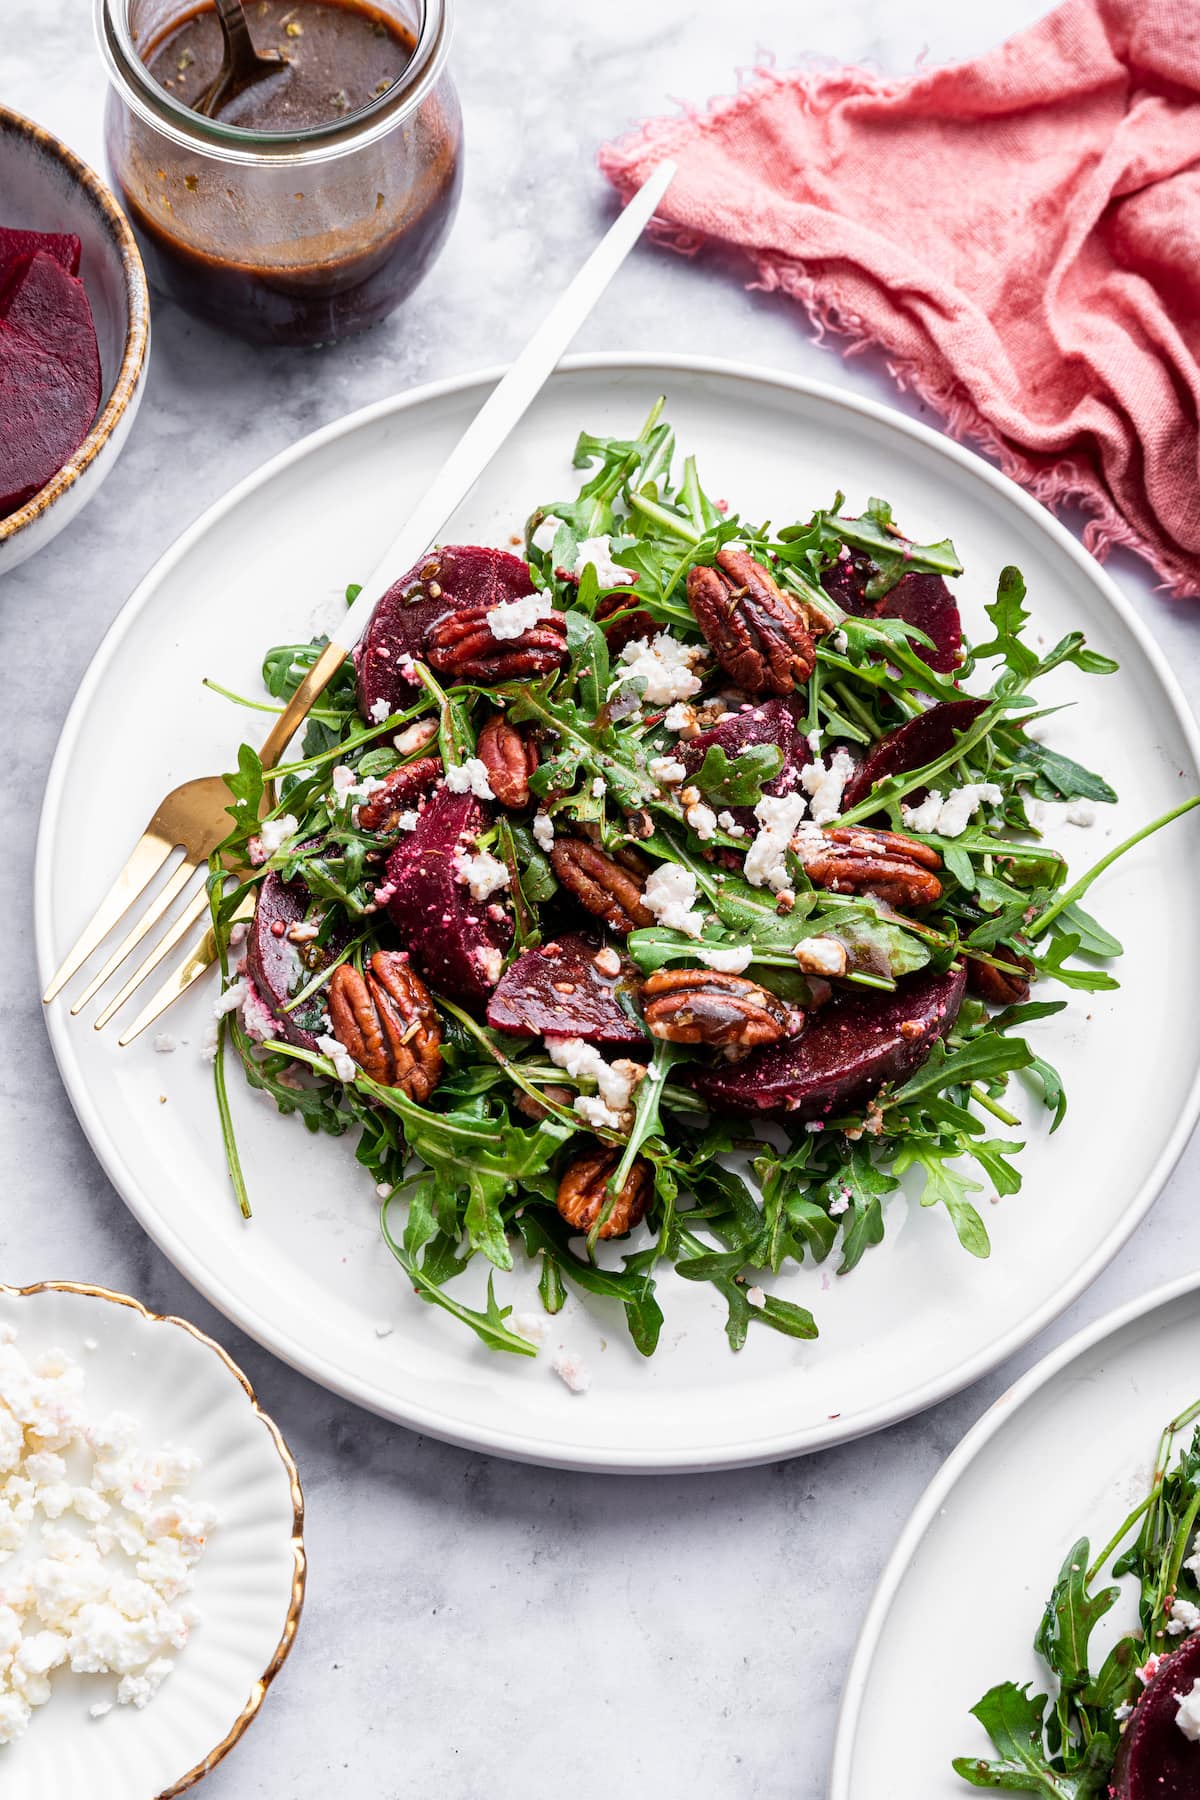 A beet salad with arugula, pecans, and crumbled feta on a white plate.